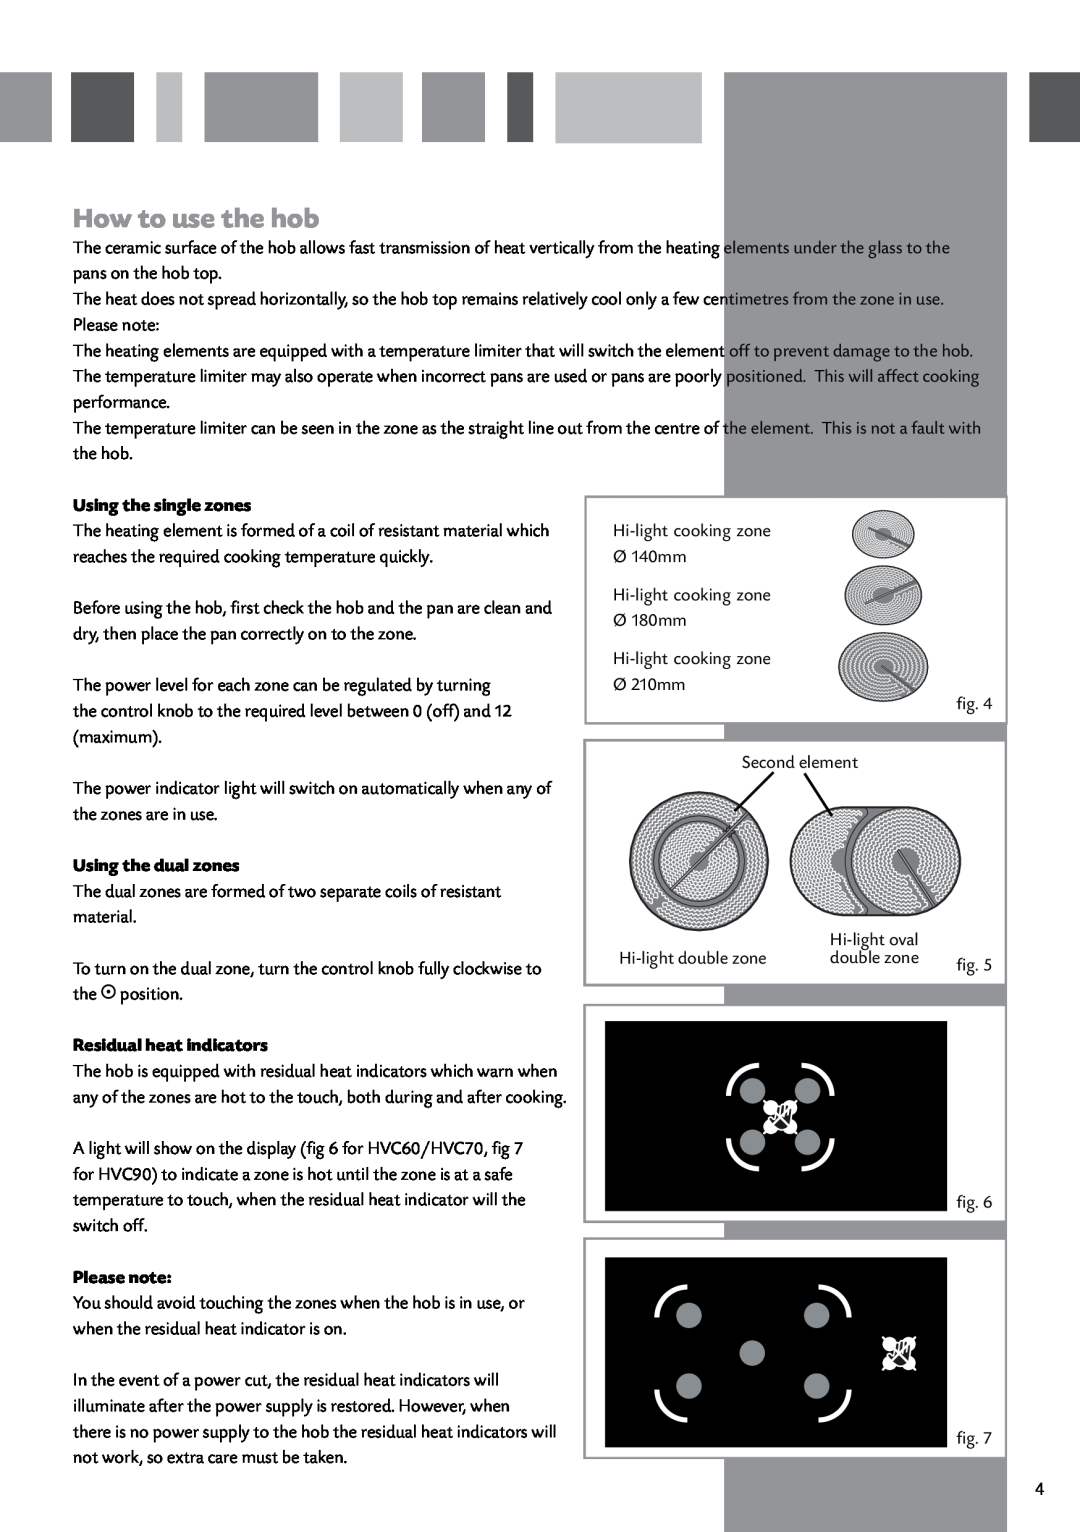 CDA HVC90, HVC70 How to use the hob, Using the single zones, Using the dual zones, Residual heat indicators, Please note 